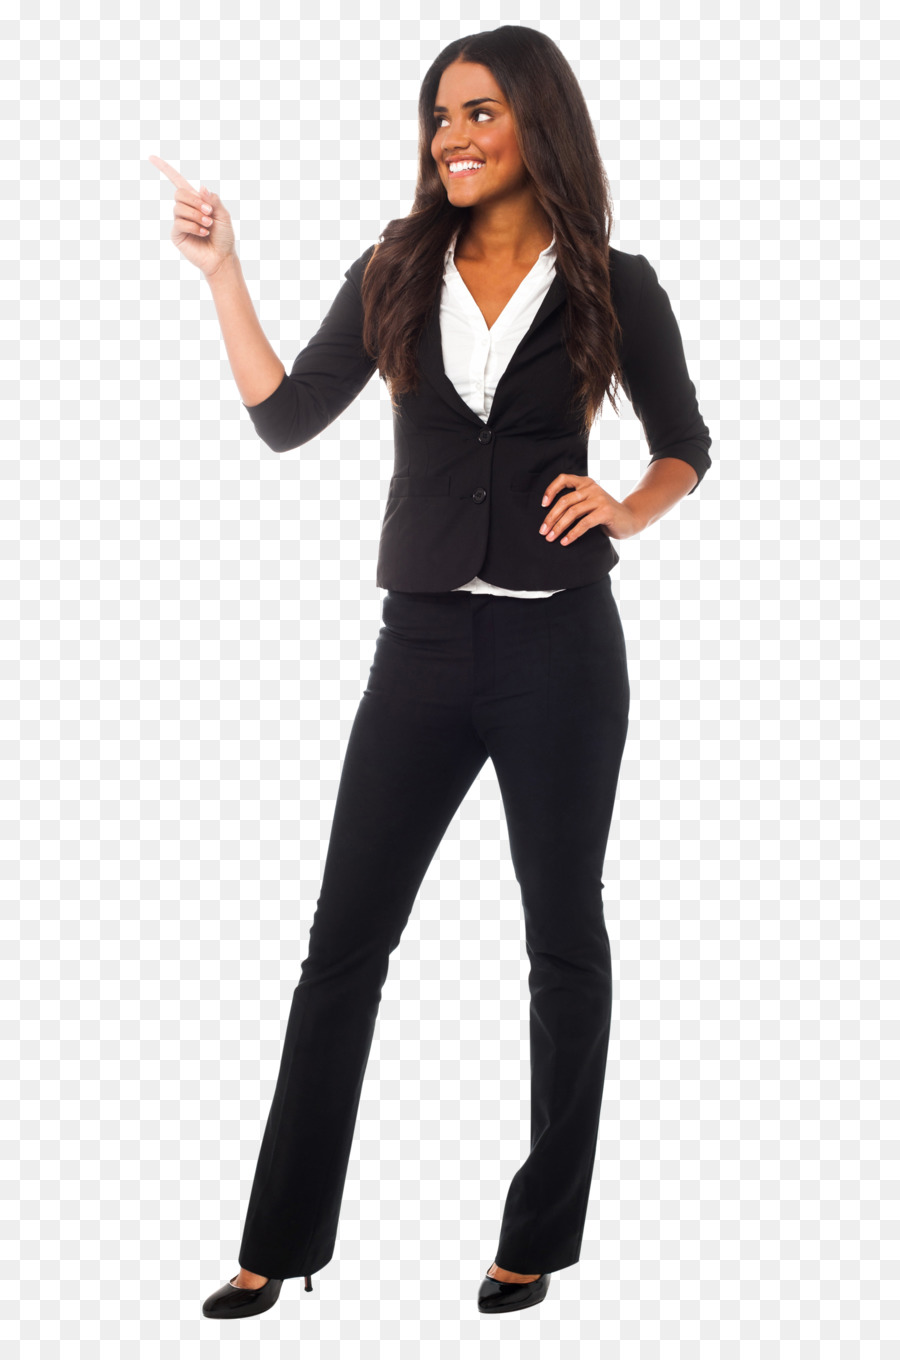 Tuxedo Image Woman Clip art Clothing - woman png download - 3200*4809 - Free Transparent Tuxedo png Download.